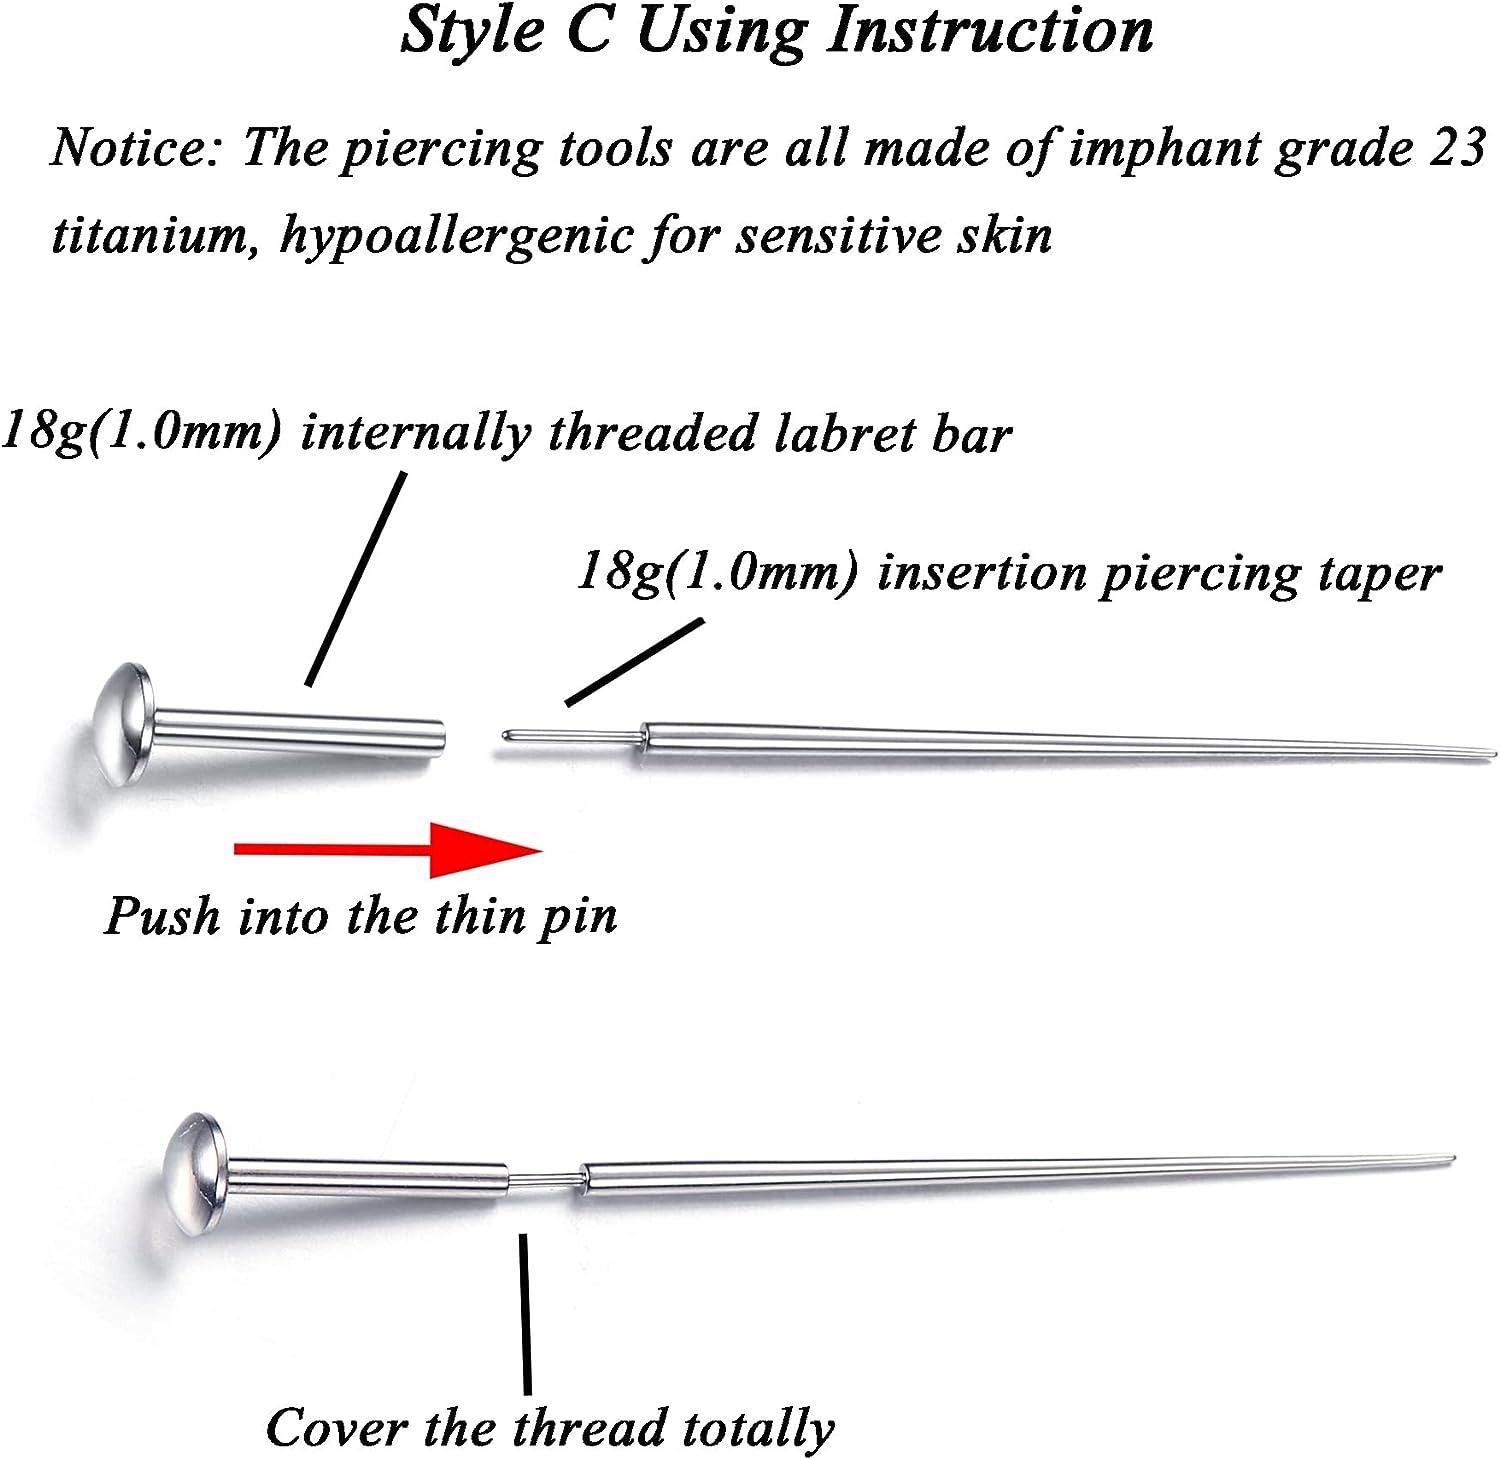 Piercing Tapers & Ear Stretching Kits